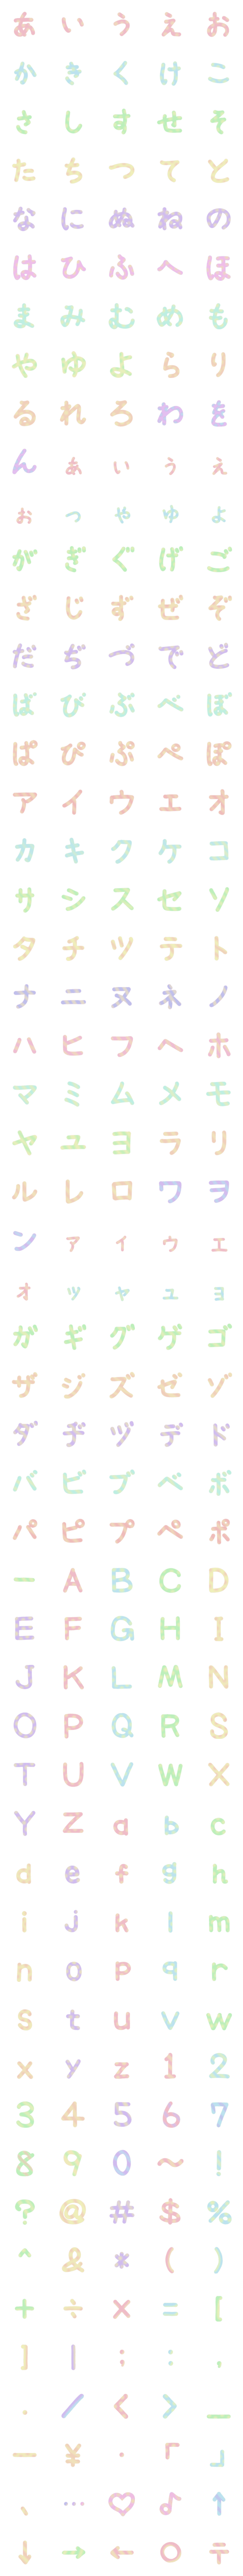 [LINE絵文字]薄い文字の画像一覧